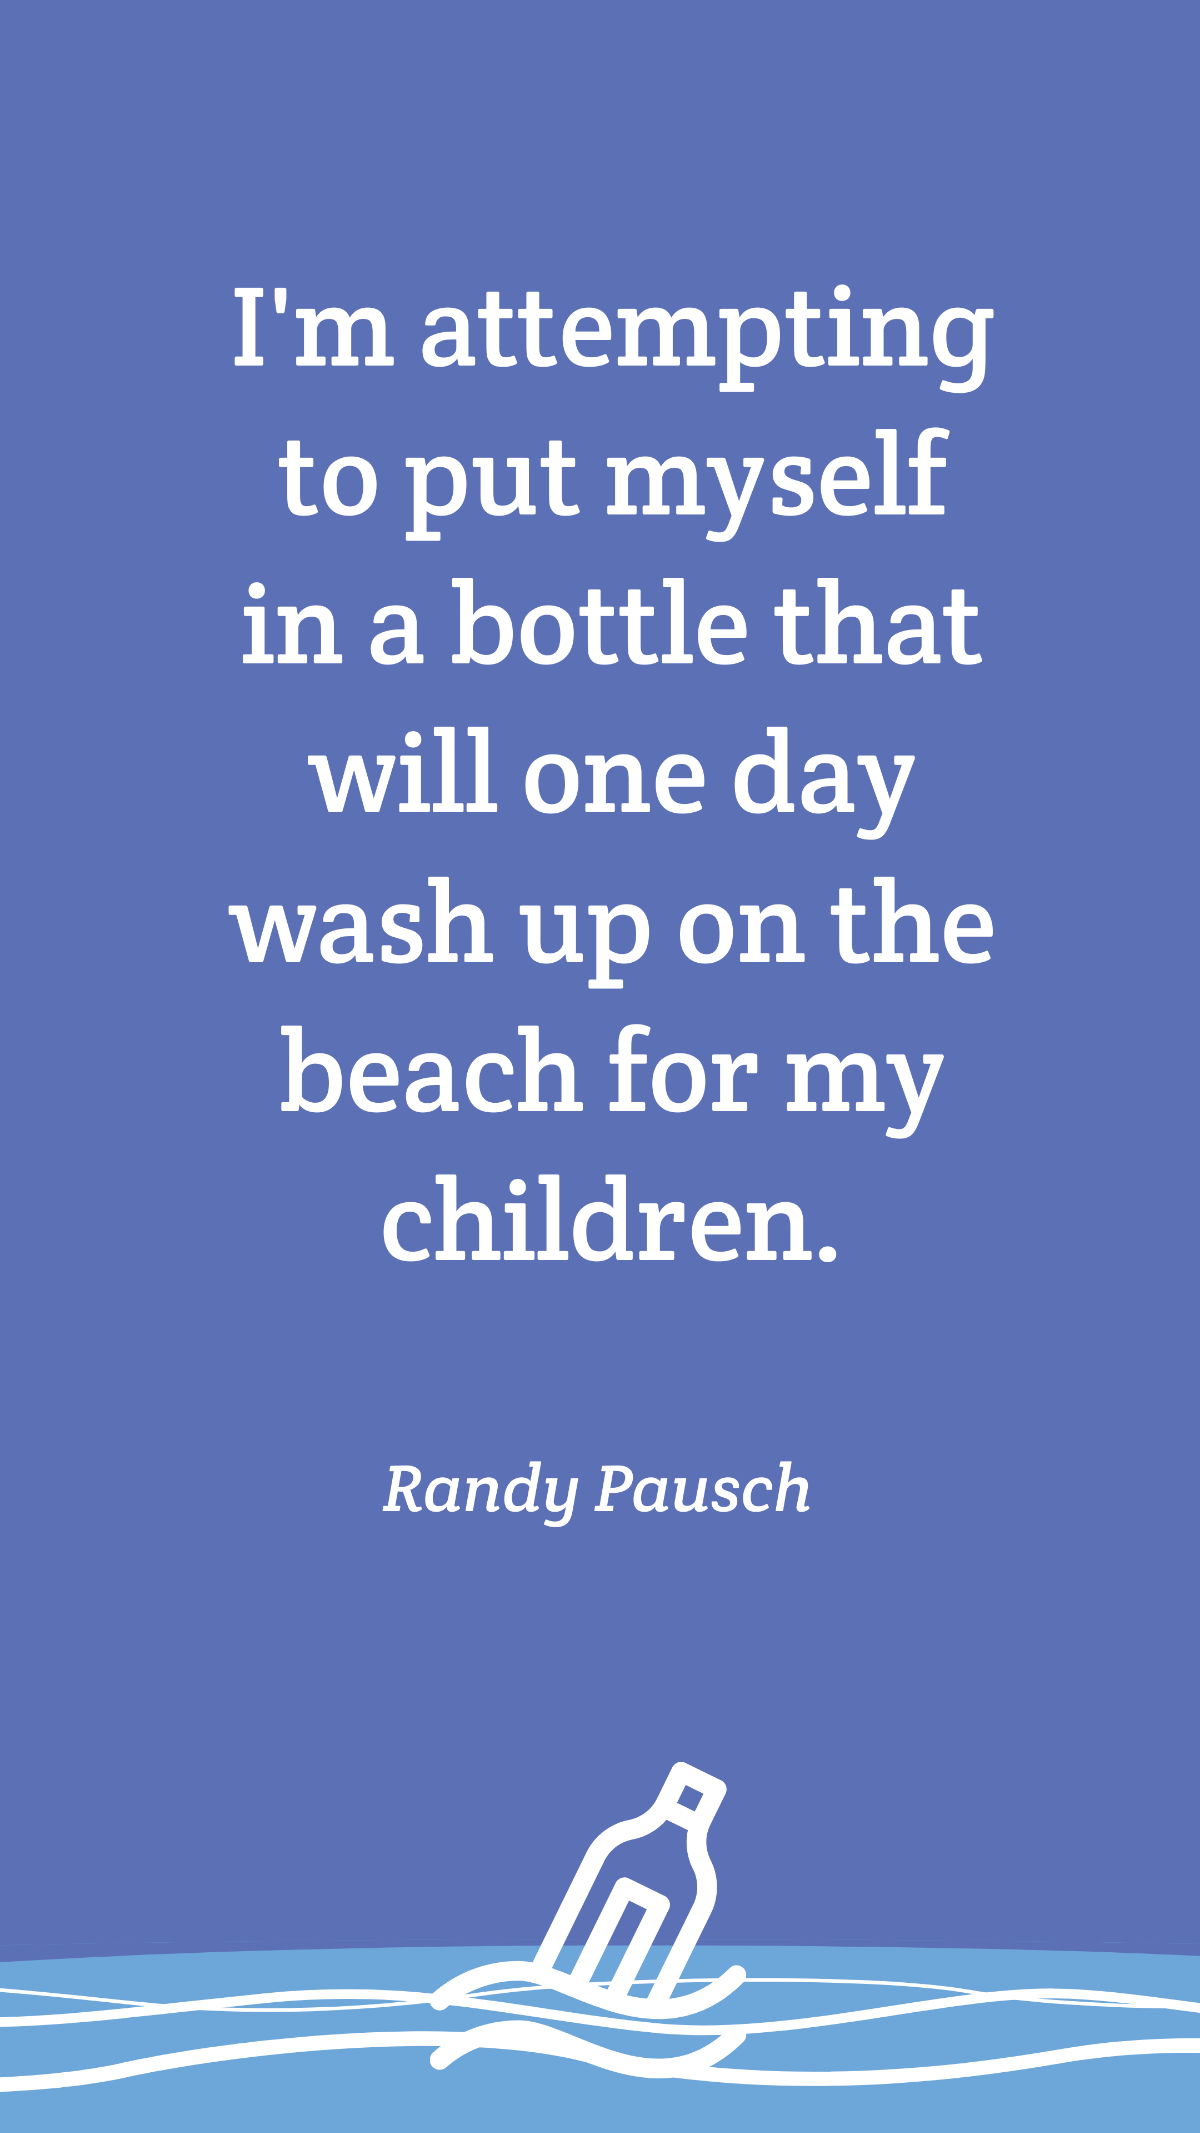 Randy Pausch - I'm attempting to put myself in a bottle that will one day wash up on the beach for my children. Template